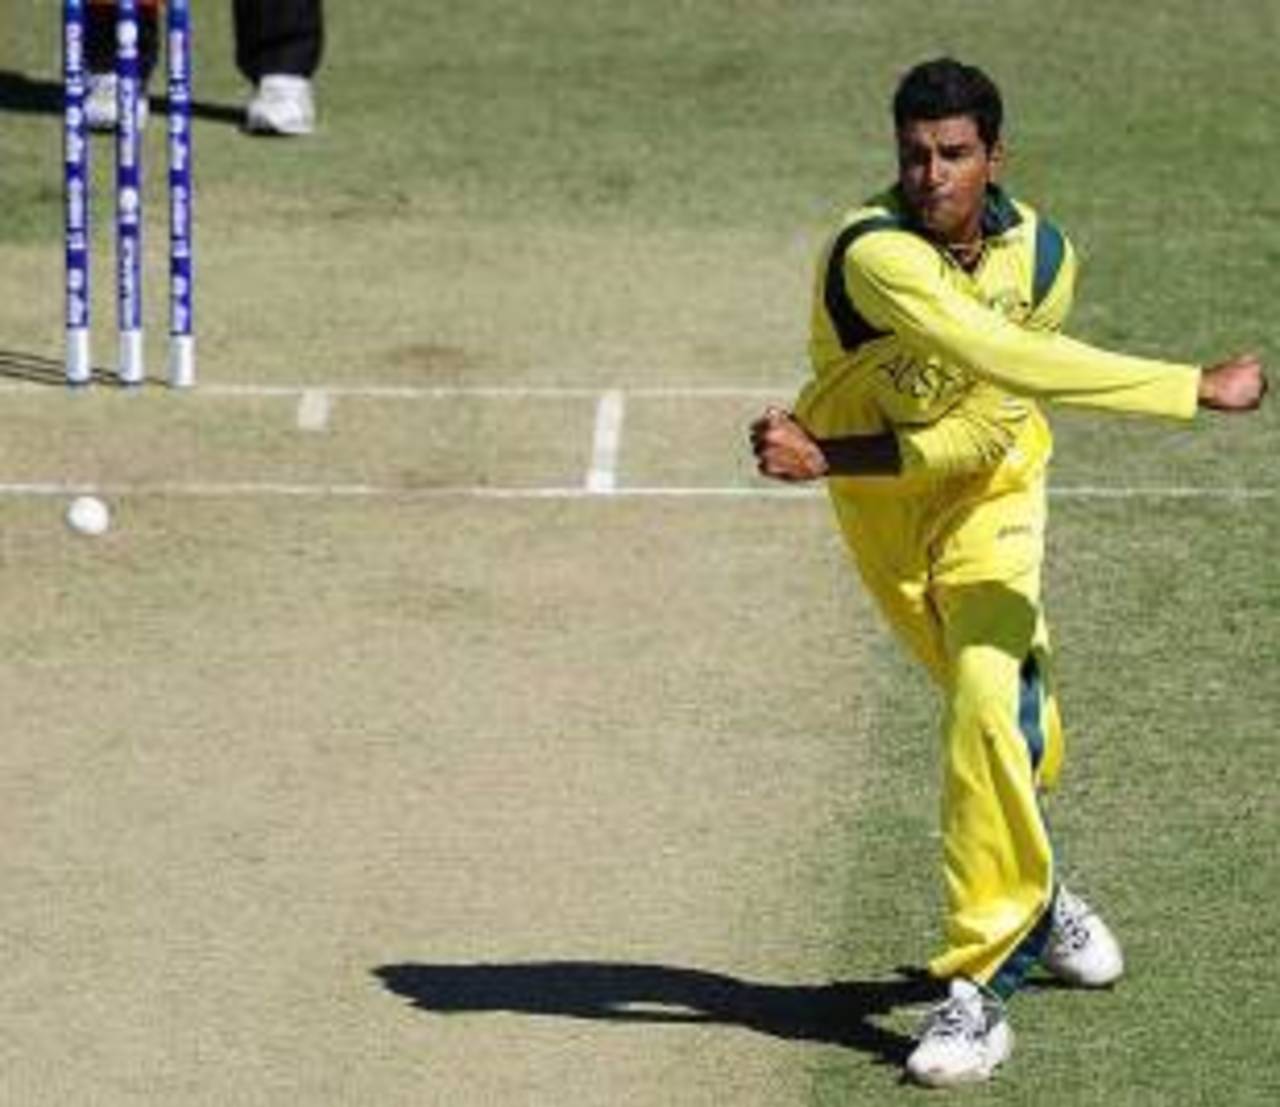 Gurinder Sandhu throws one hard down the pitch, Australia v Nepal, Group A, ICC Under-19 World Cup 2012, Townsville, August 13, 2012